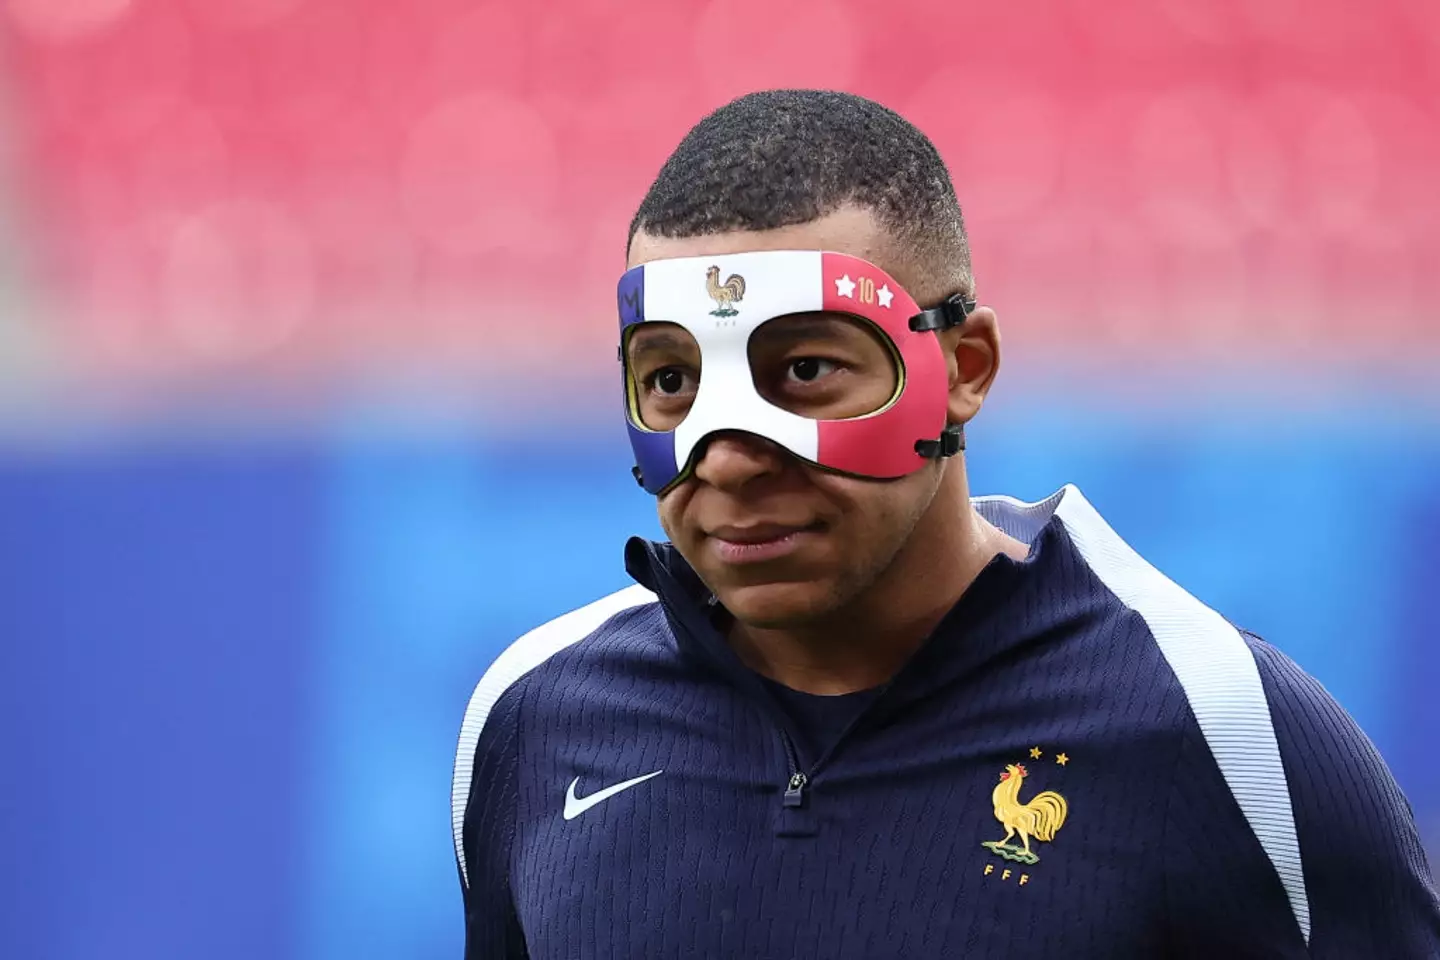 Kylian Mbappe won't be able to use the mask (FRANCK FIFE/AFP via Getty Images)